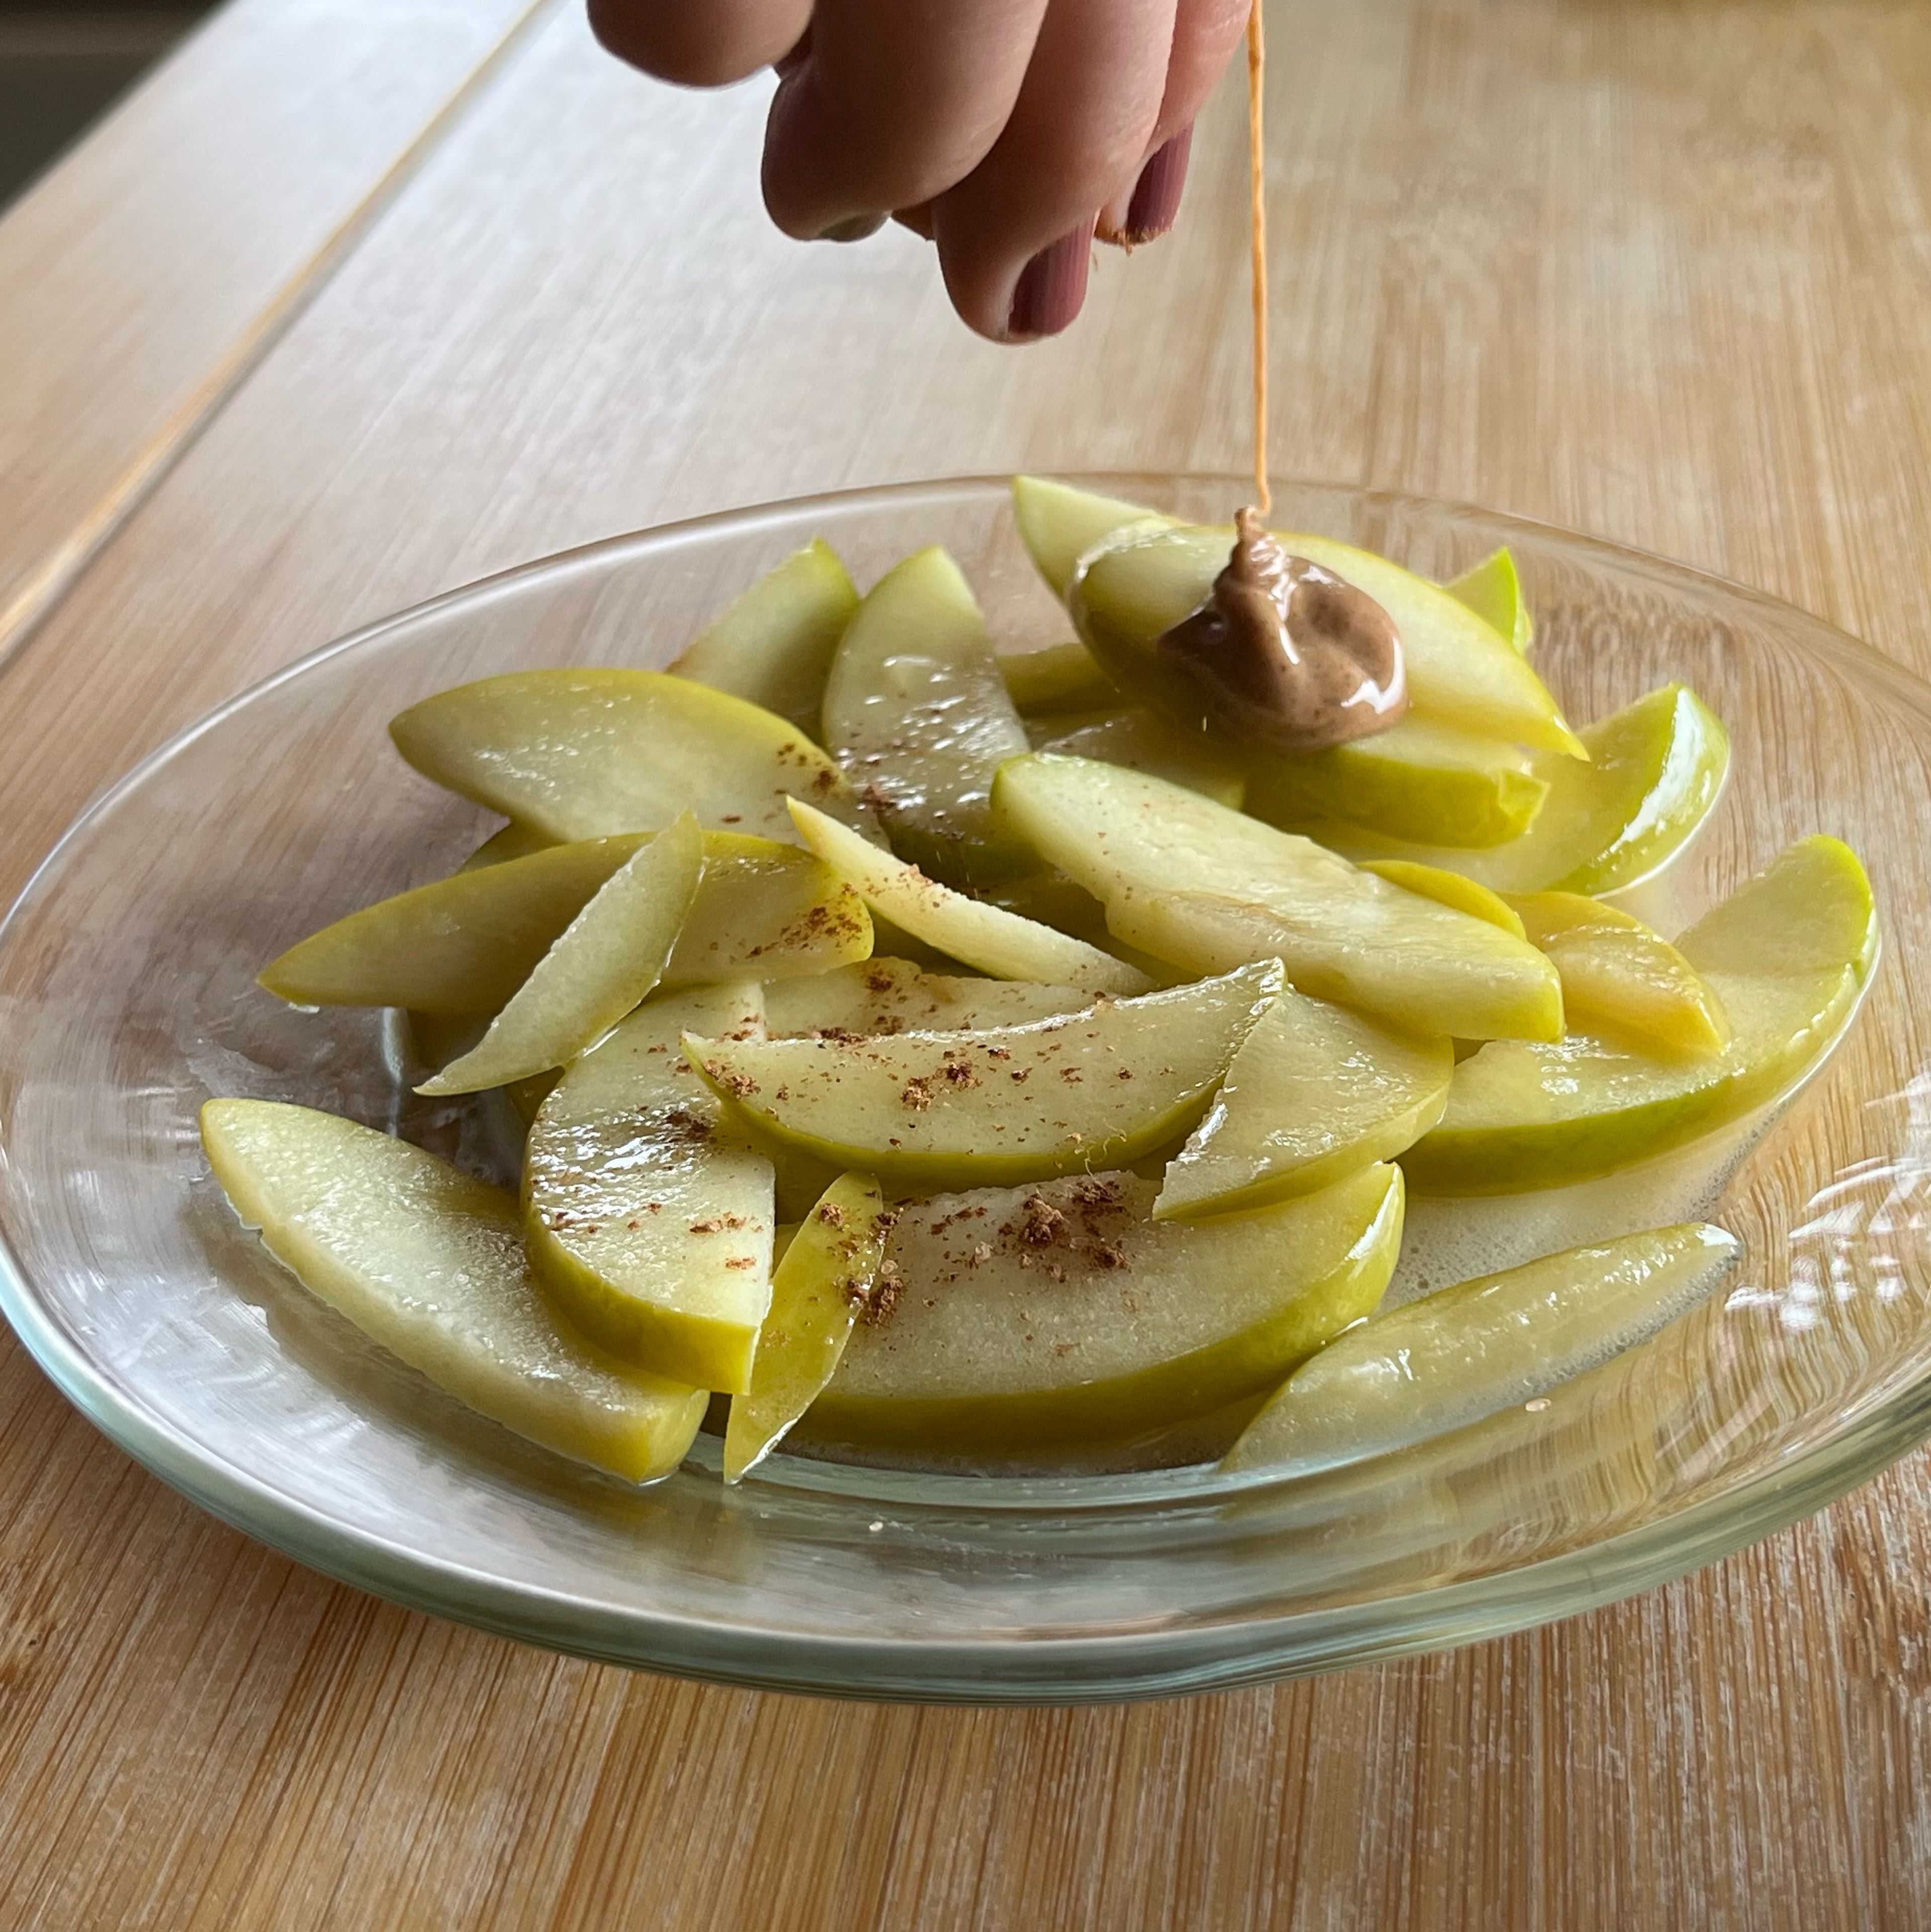 Once your apple slices are cooked, place them on a bowl or plate and drizzle (or pour 😉) almond butter, cardamom, cinnamon, and salt on top. Enjoy!